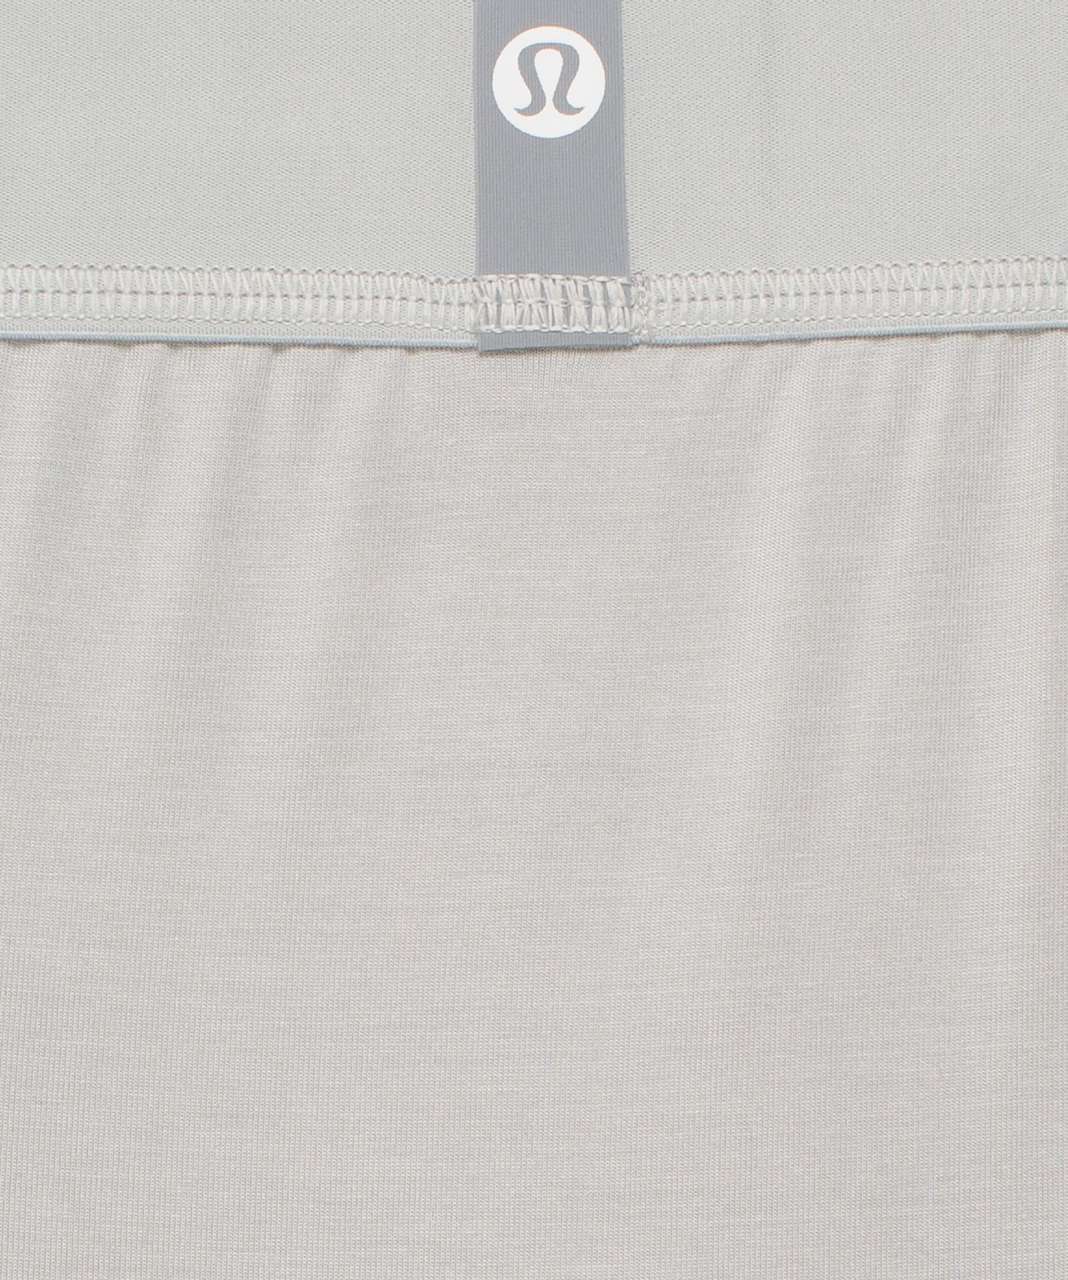 Lululemon Always In Motion Brief with Fly - Seal Grey